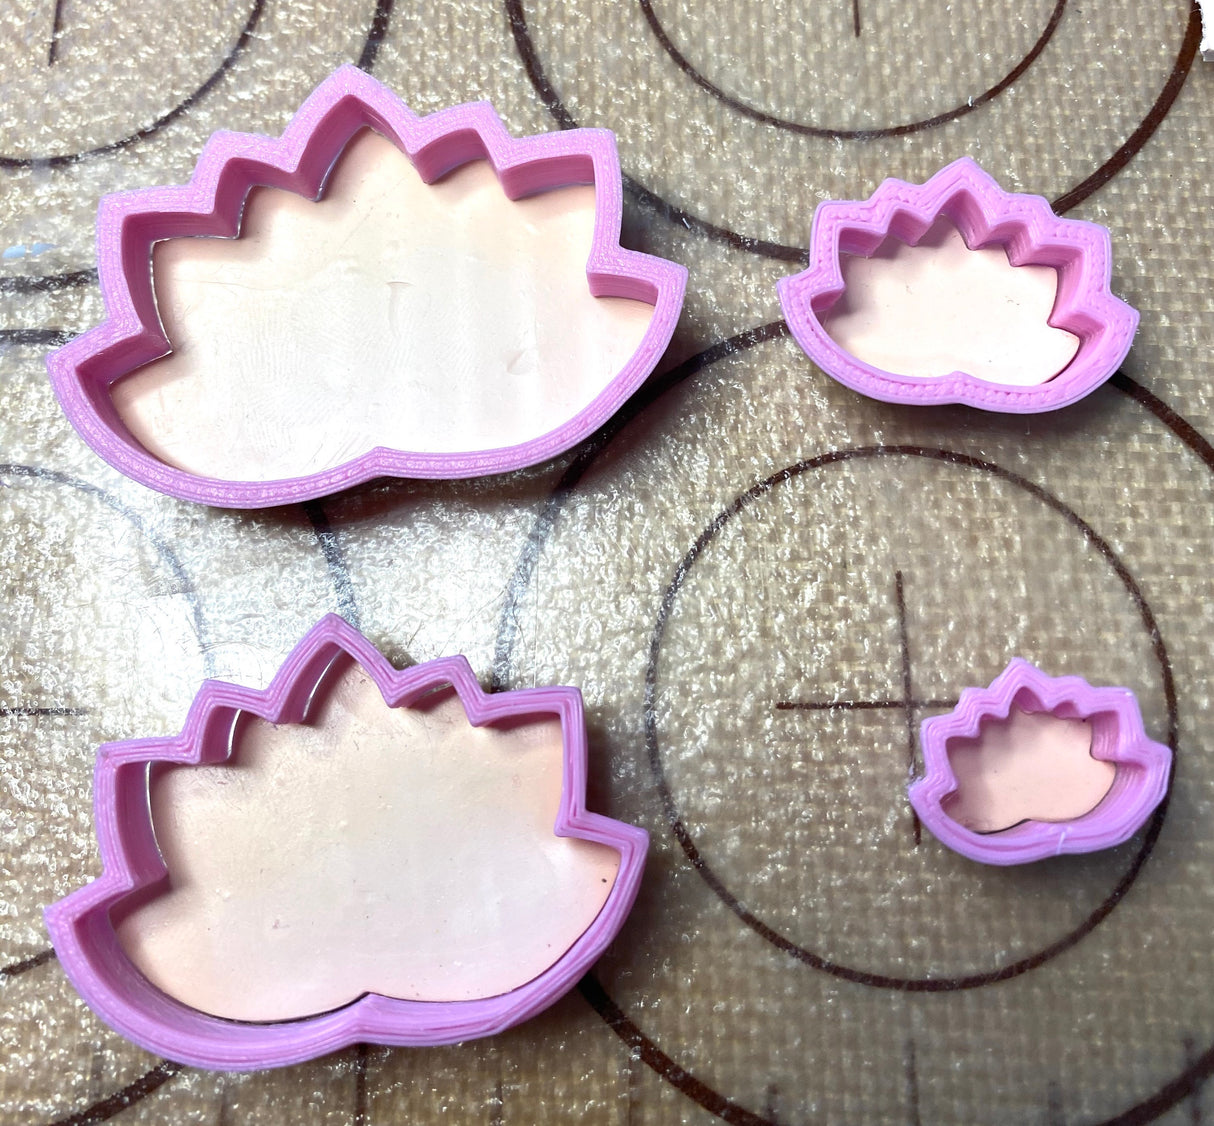 Polymer clay cutters (Lotus Flower shapes) Ceramic Clay | Clay Tools | Clay Supplies